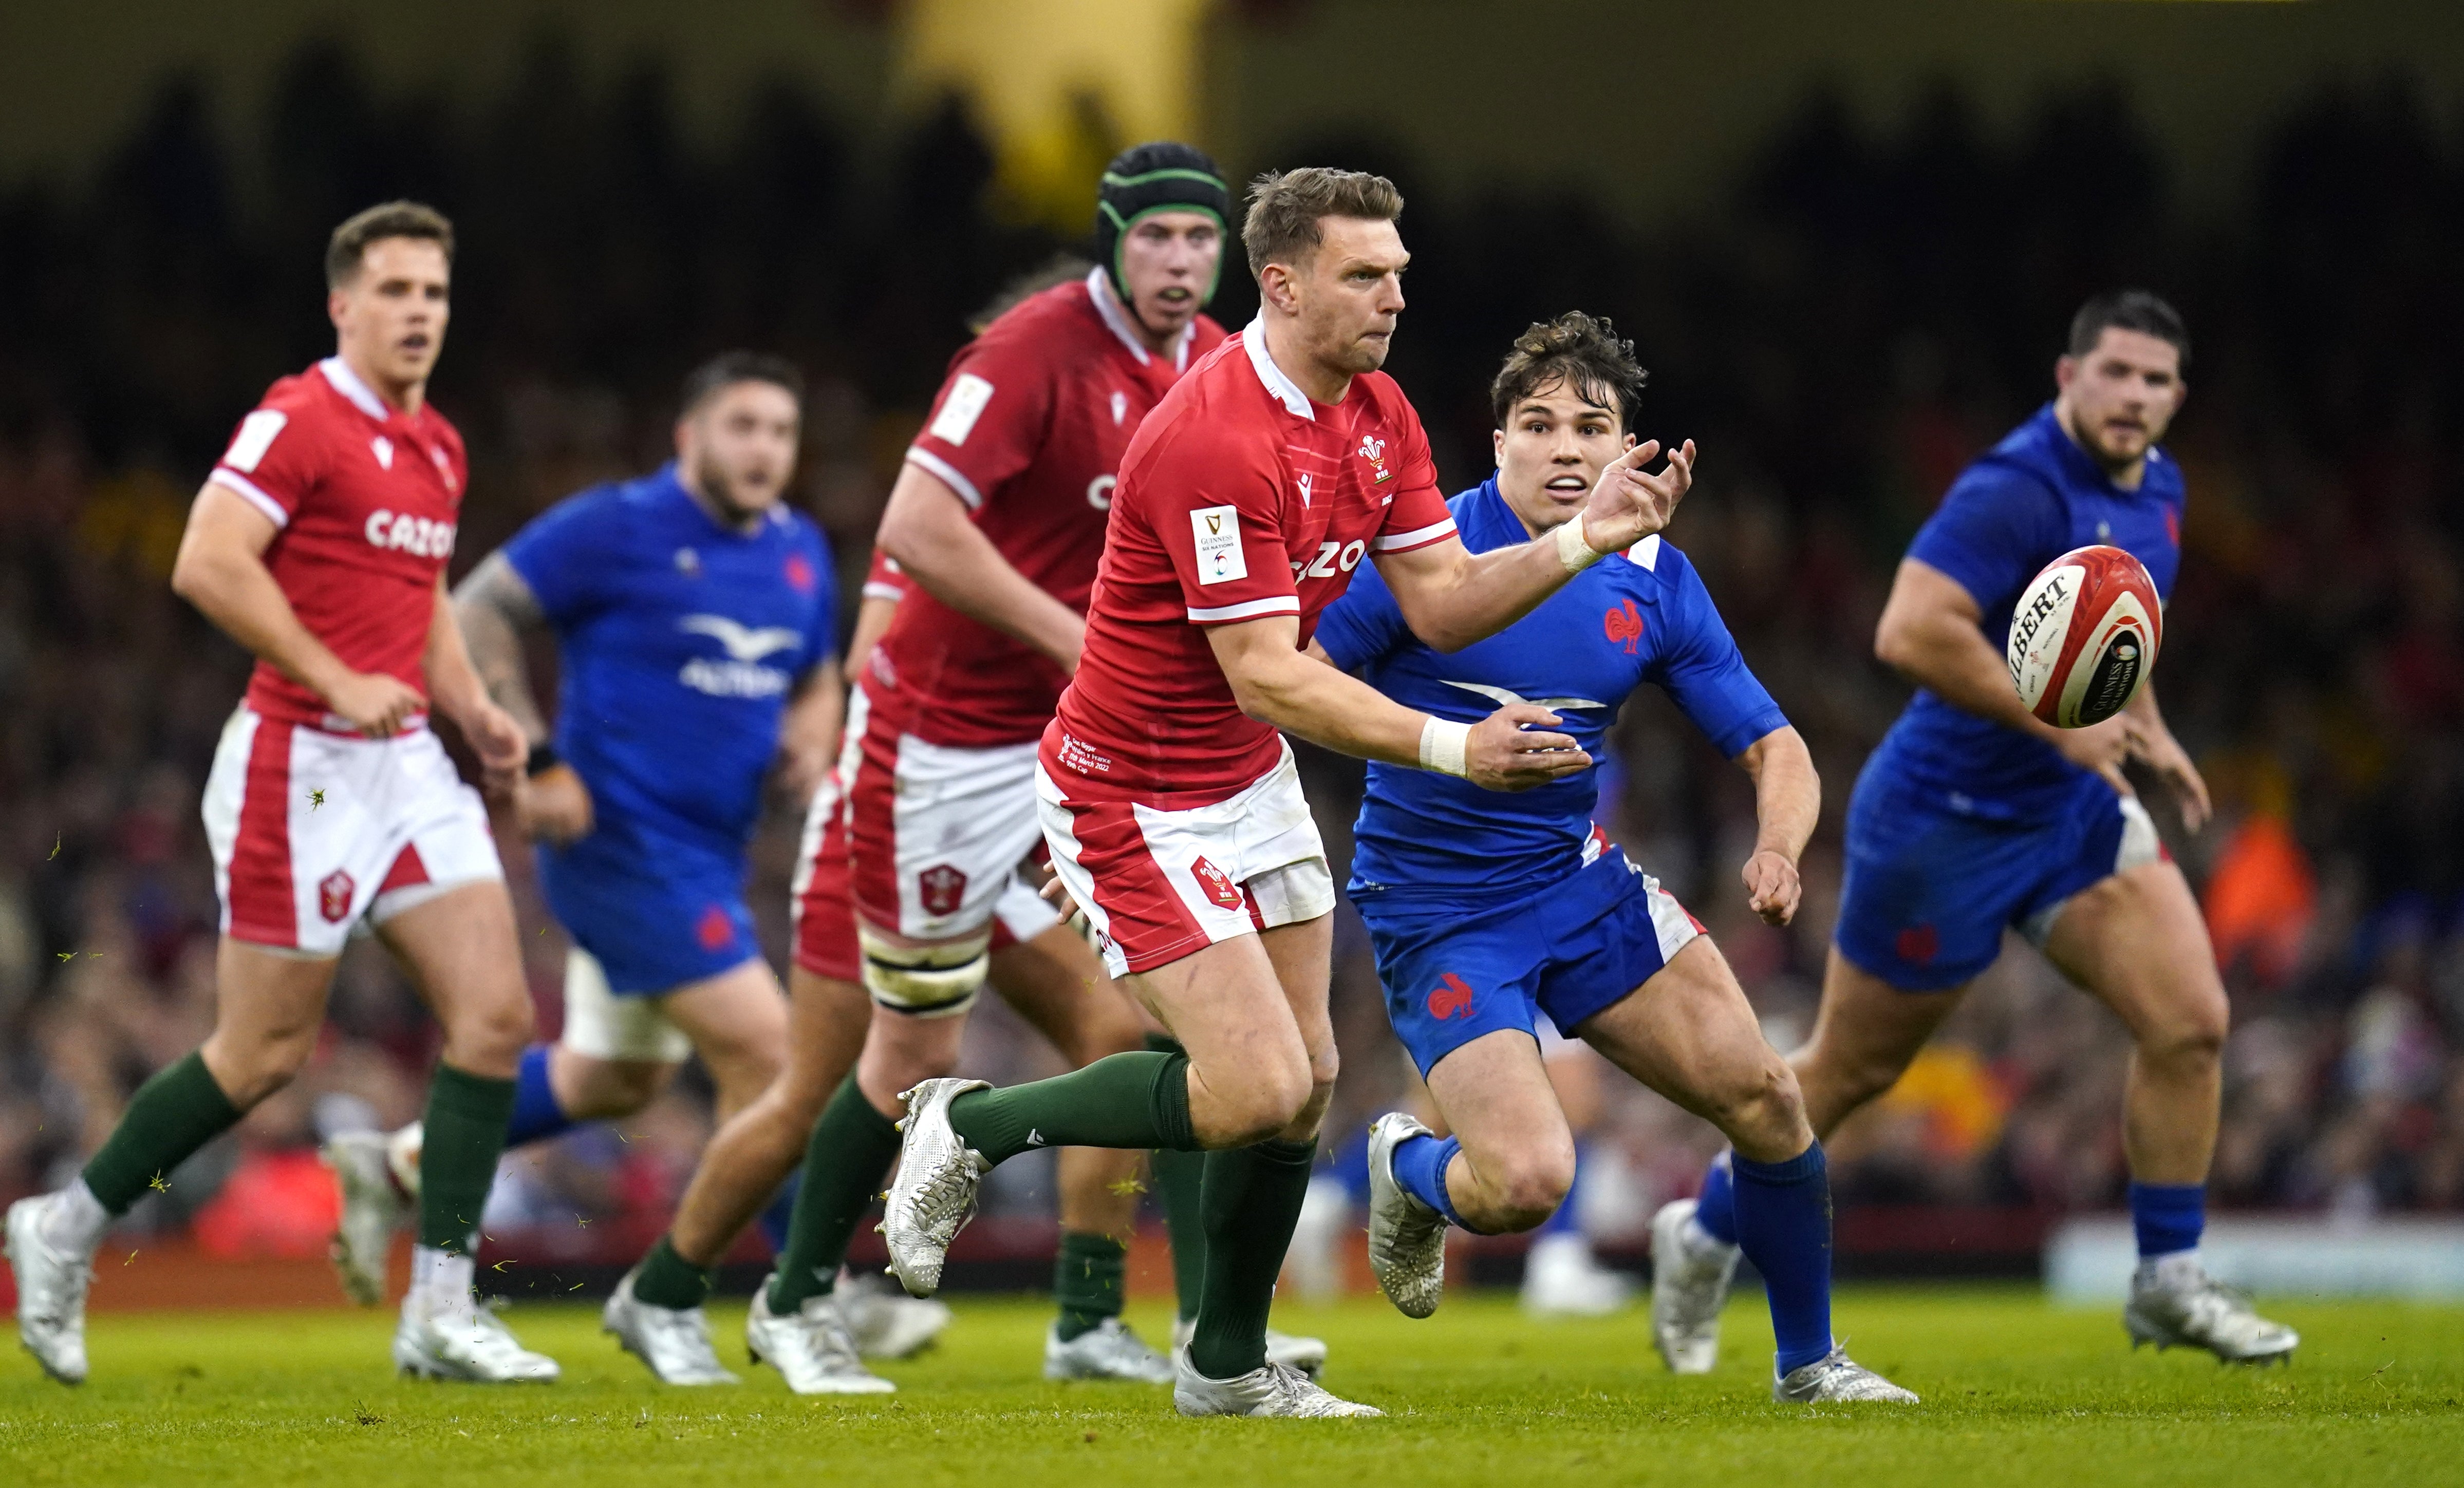 Captain Dan Biggar said he was ‘annoyed’ by Wales’ Six Nations defeat to France in Cardiff (Nick Potts/PA)